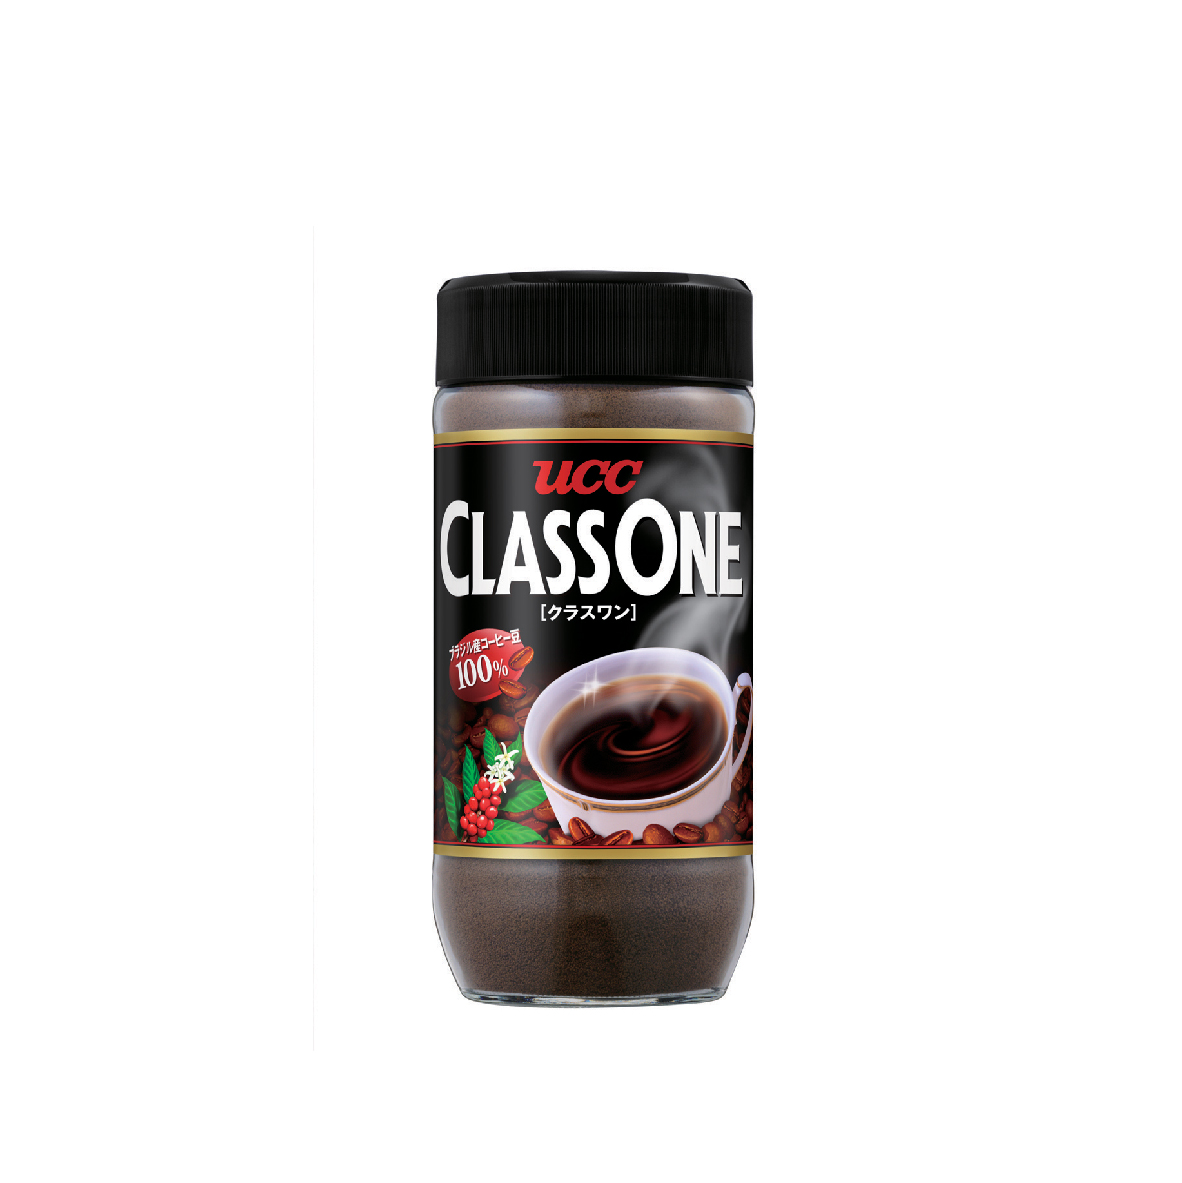 Class One Instant Coffee Bottle